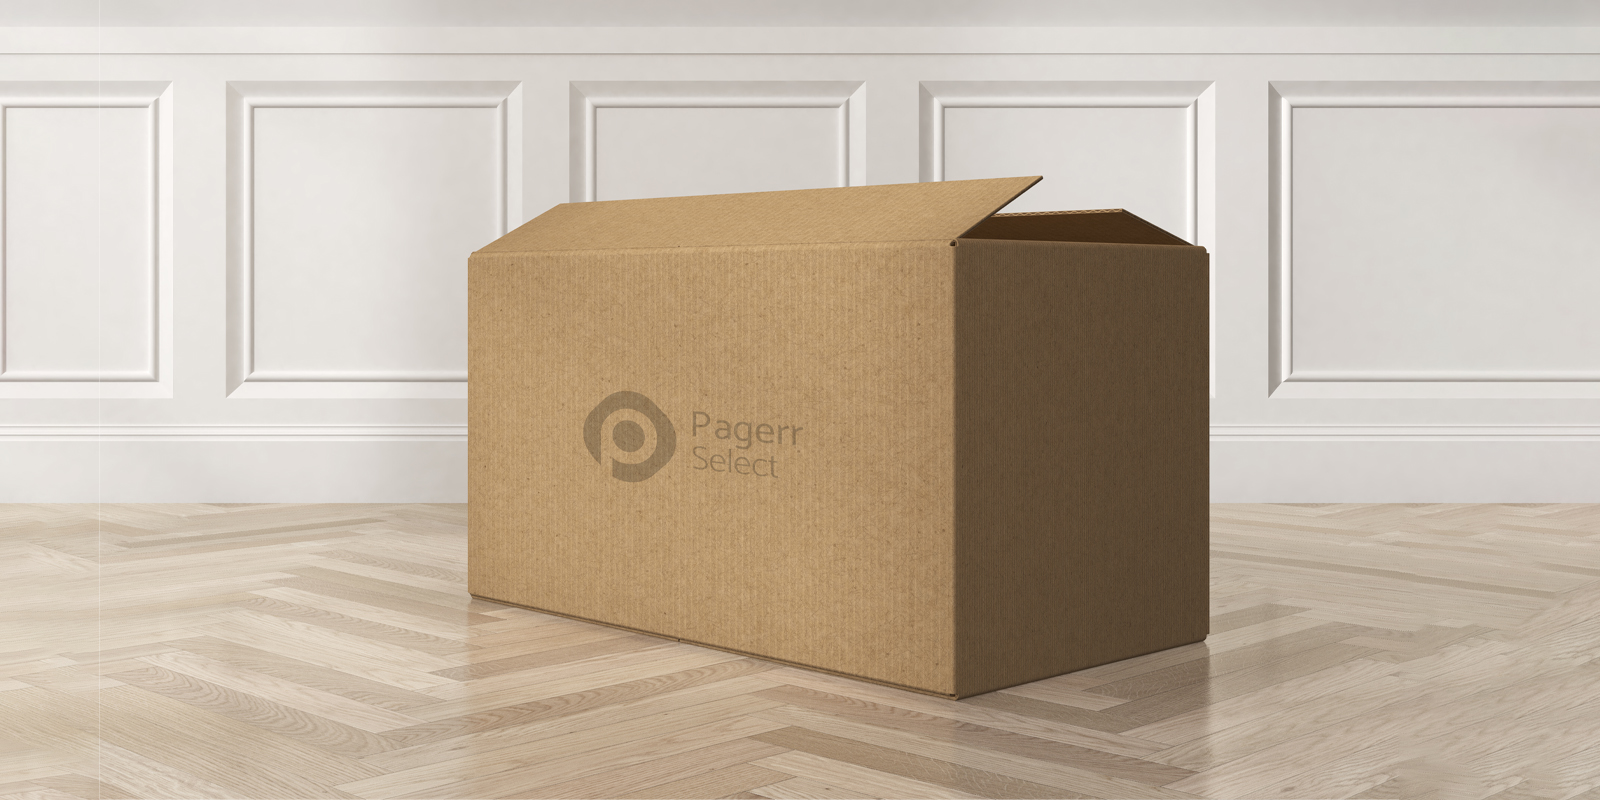 Moving boxes in Seville - Print with Pagerr